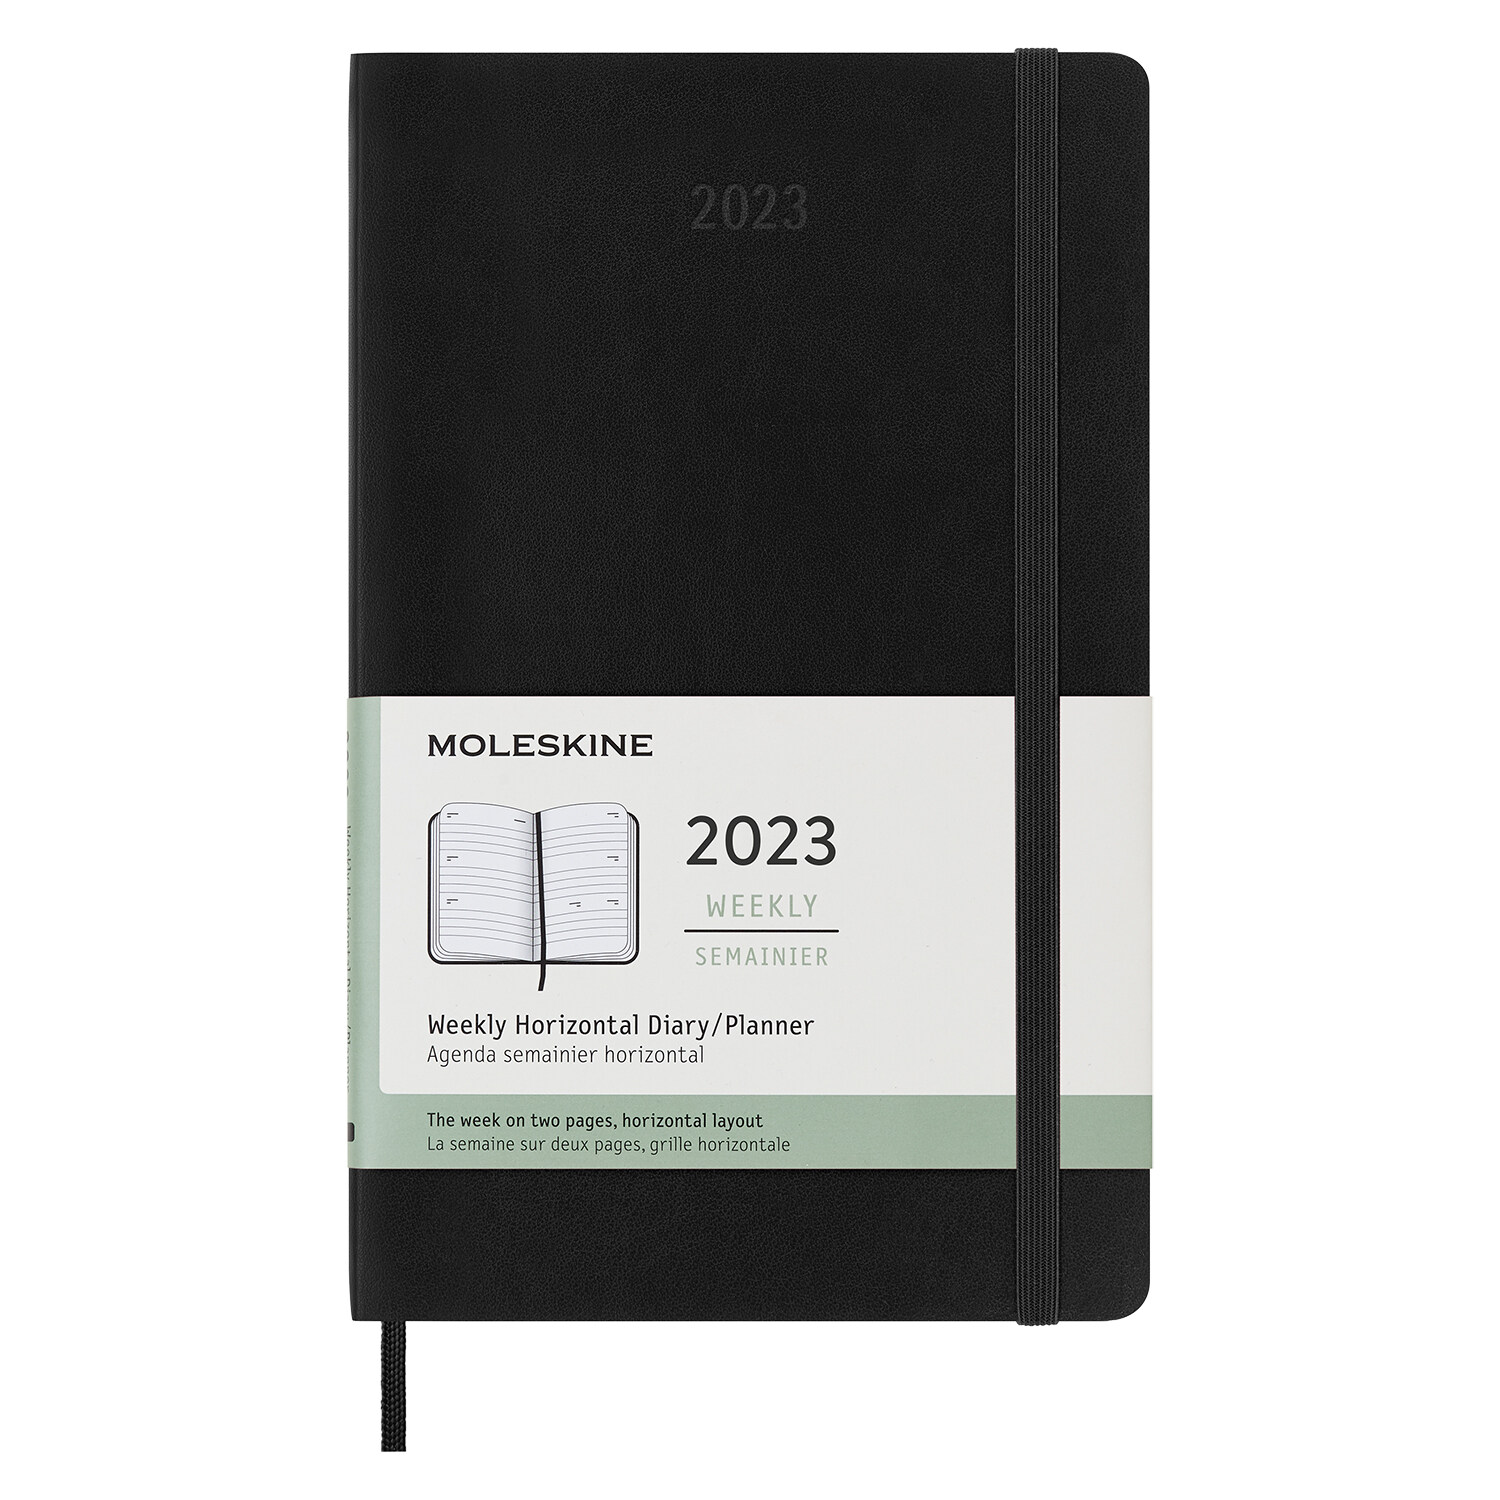 Moleskine 2023 Weekly Horizontal Planner, 12m, Large, Black, Hard Cover (5 X 8.25) (Other)